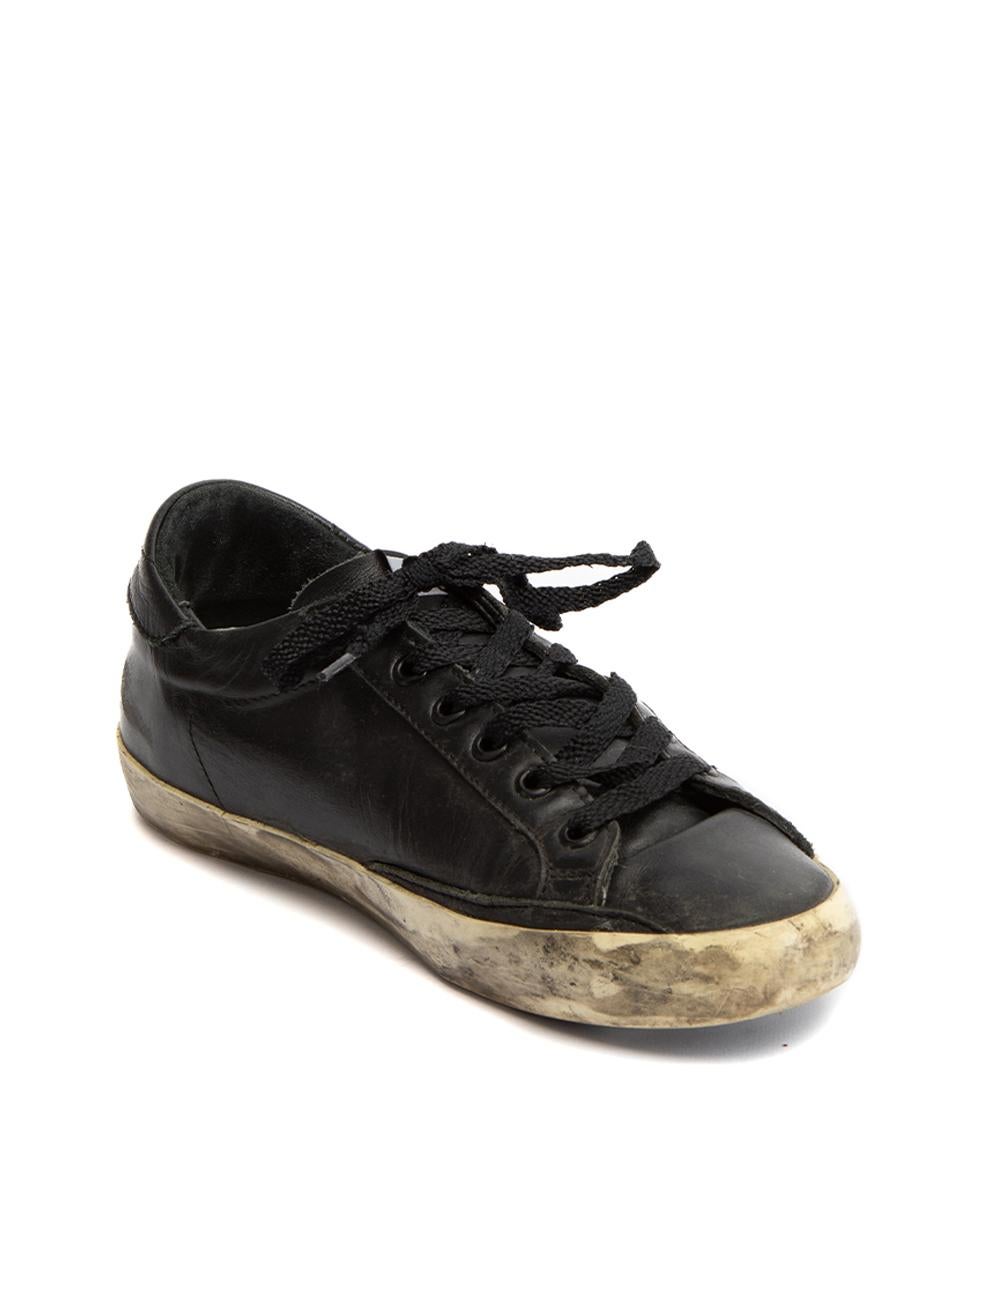 CONDITION is Very good. Minimal wear to shoes is evident. Light creasing to leather exterior on this used Golden Goose designer resale item. This item comes with original dustbag.
 
 Details
  Black
 Leather
 Low top trainer
 Lace up
 Round toe
